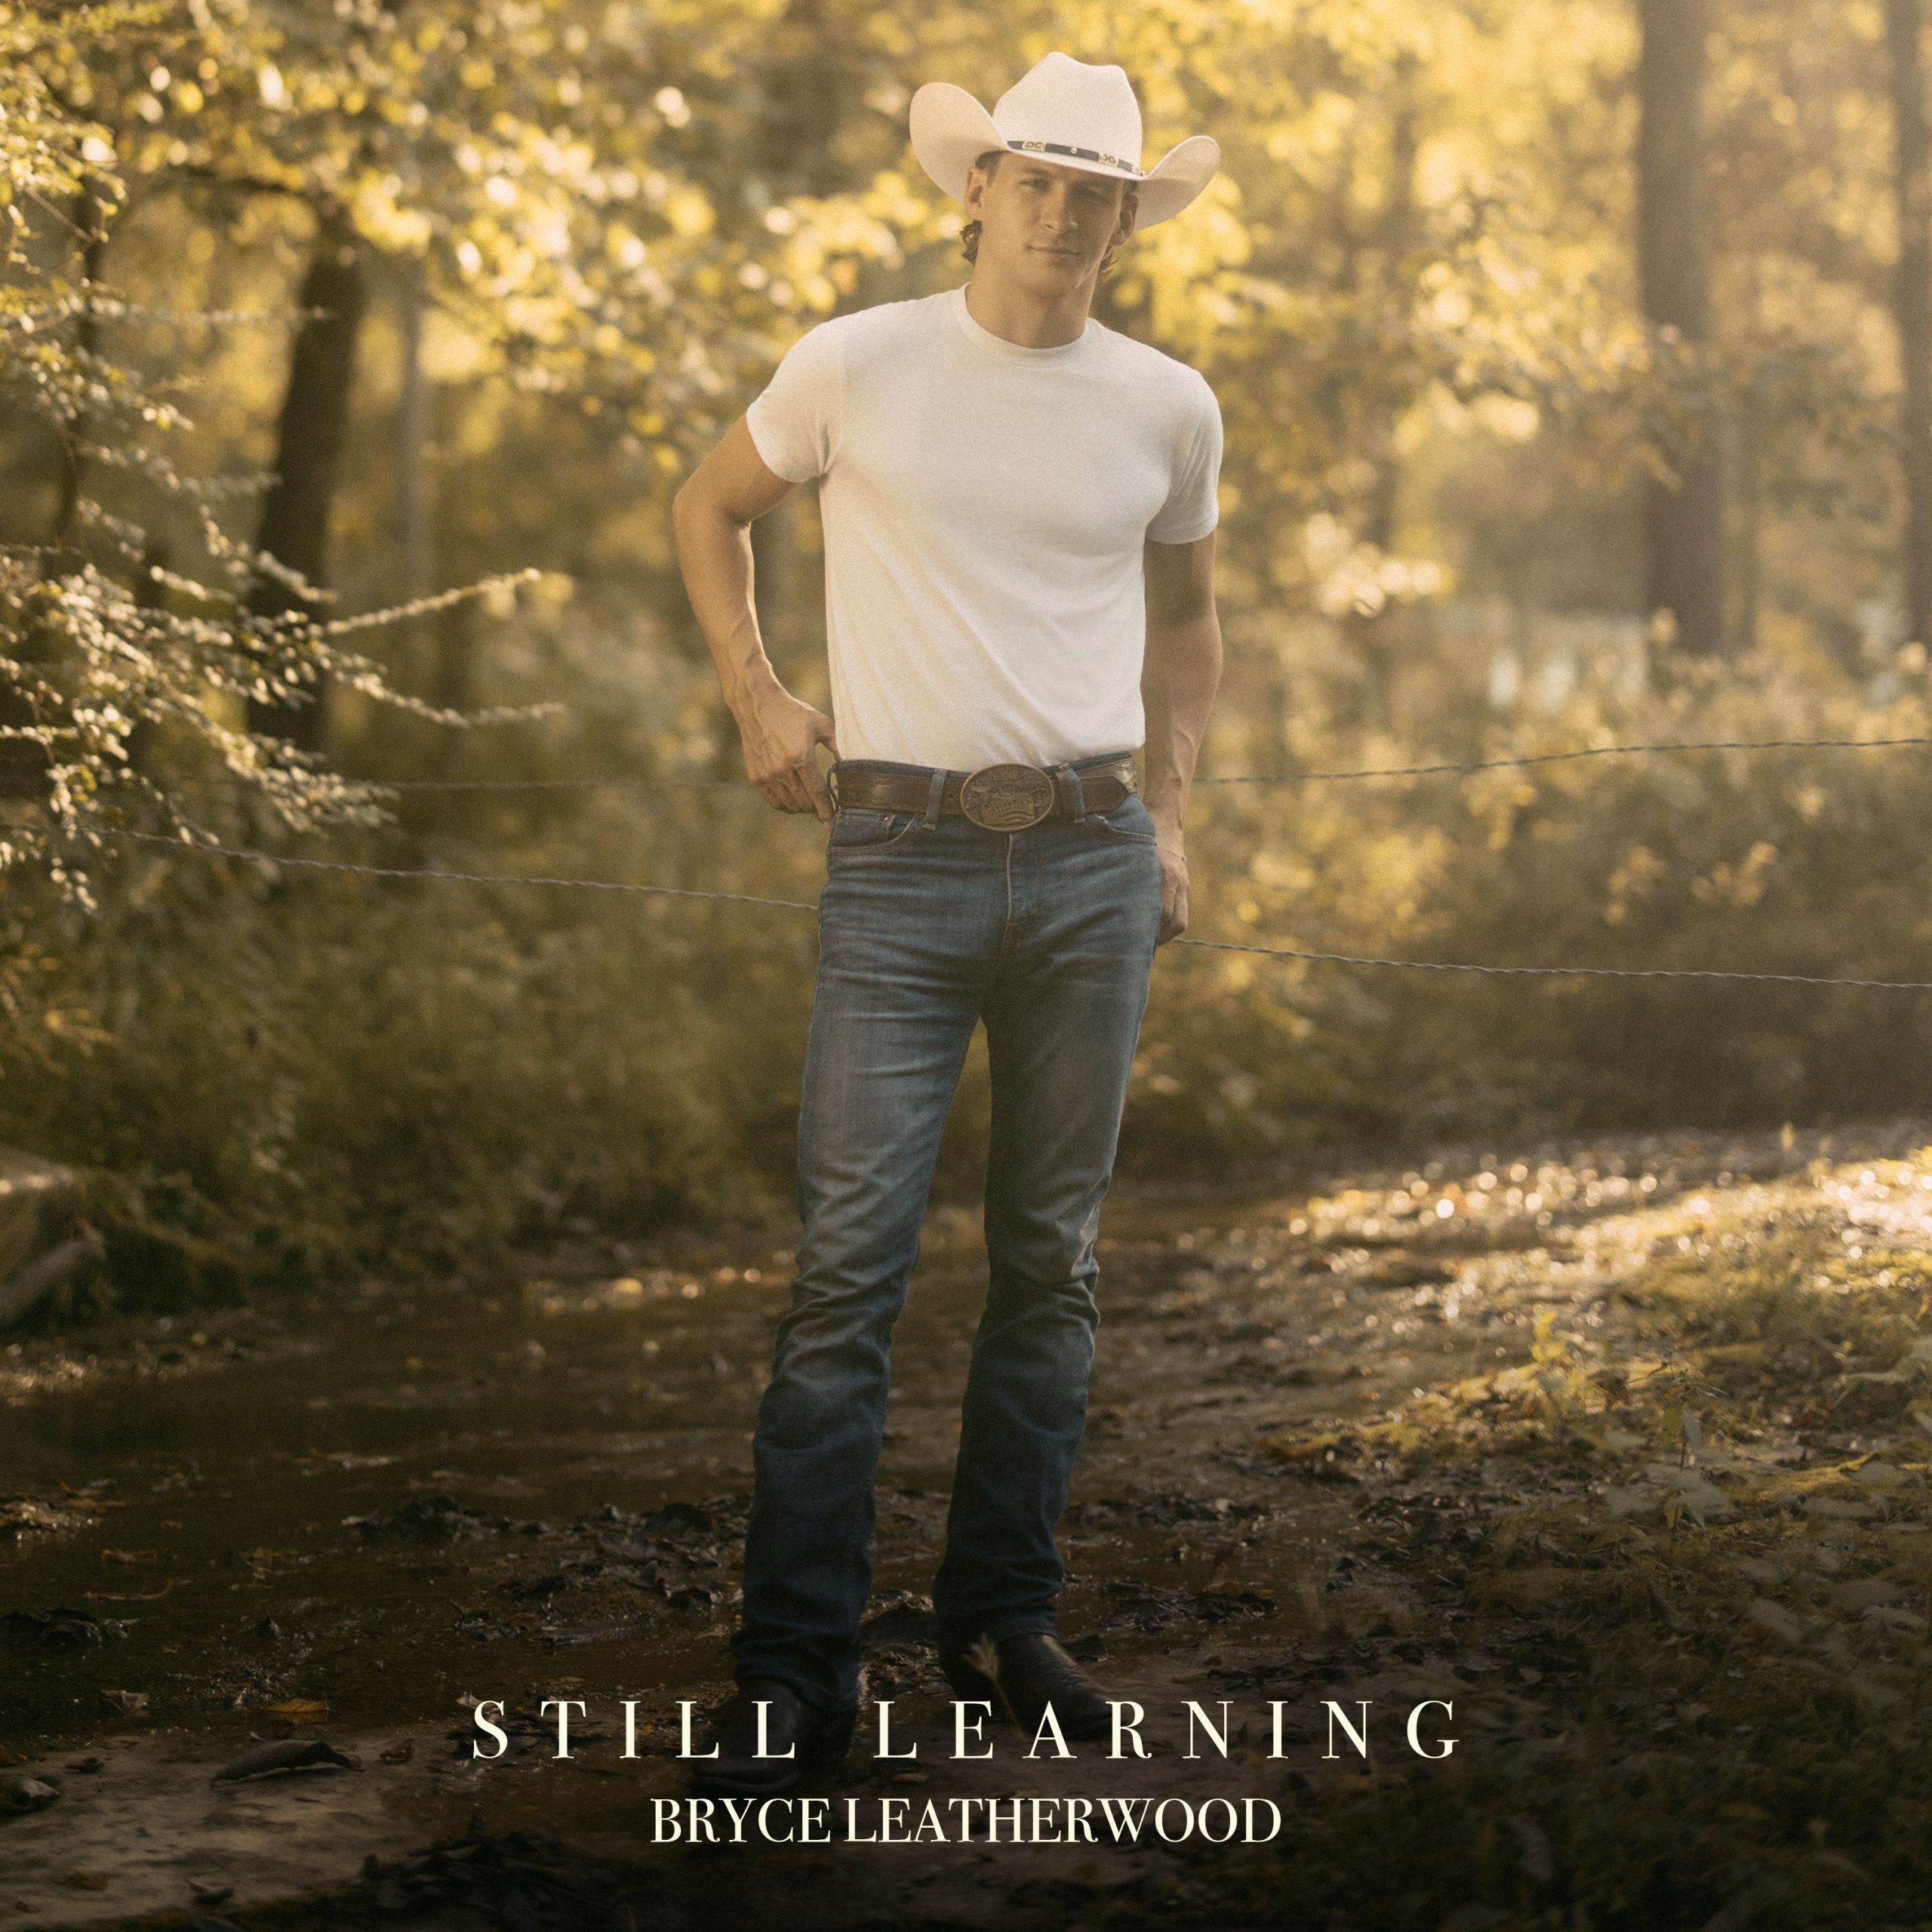 BRYCE LEATHERWOOD’S REFLECTIVE “STILL LEARNING” OUT NOW